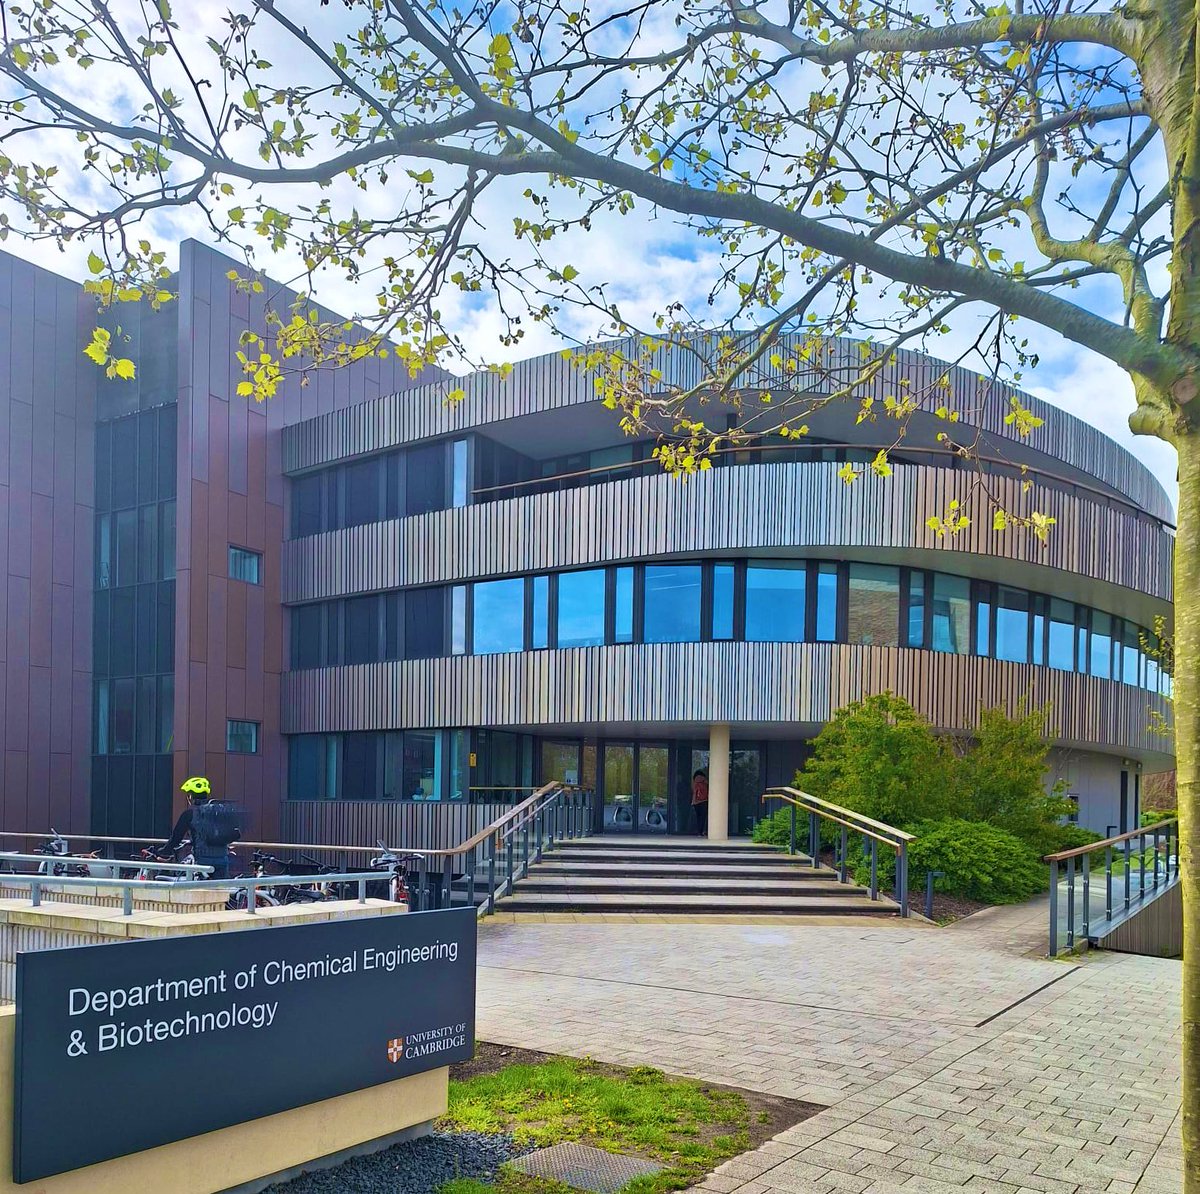 🌟 Exciting times ahead! 🚀 Delighted to share that earlier this month, I became a proud member of the @DiMicheleLAB1 and @cebcambridge as a postdoc! 🌟🧬
It’s a fresh start with endless possibilities! 🪄🔬
#postdoclife #DNAnanotech #SyntheticCells